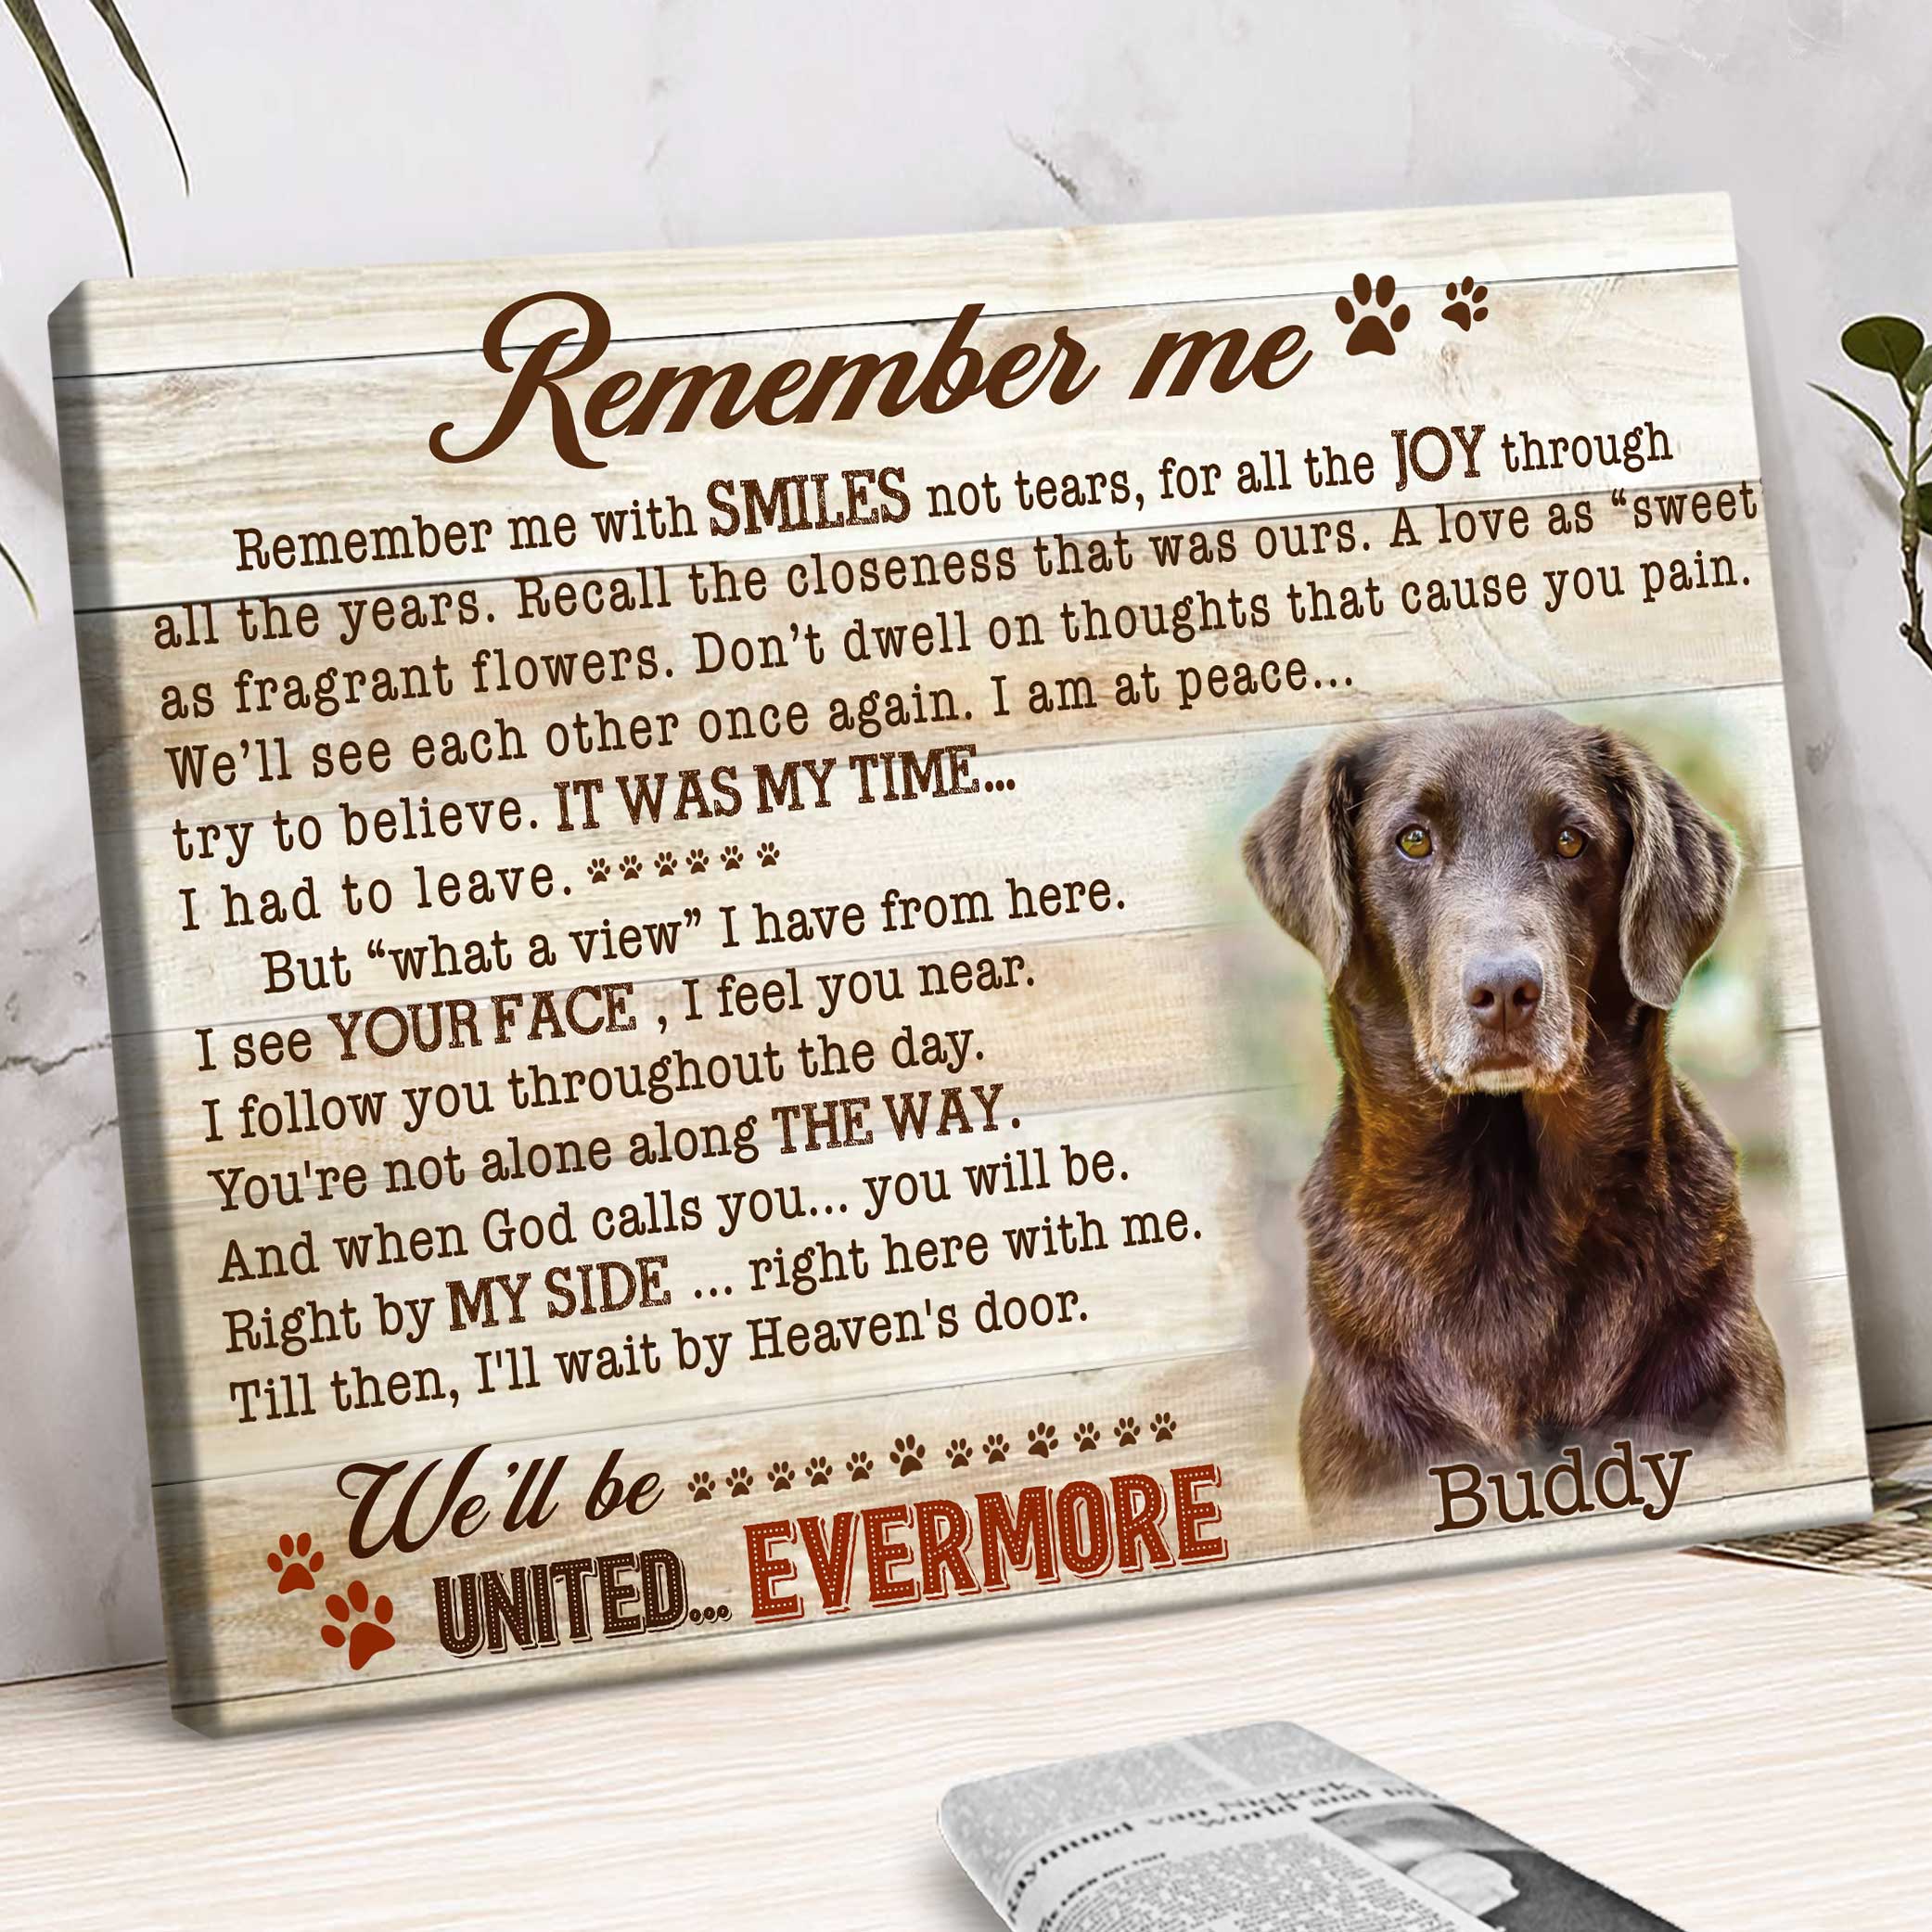 https://benicee.com/wp-content/uploads/2022/09/Gifts-Loss-Of-Pet-Pet-Memorial-Gifts-Personalized-Comforting-Words-For-Loss-Of-pet-6.jpeg